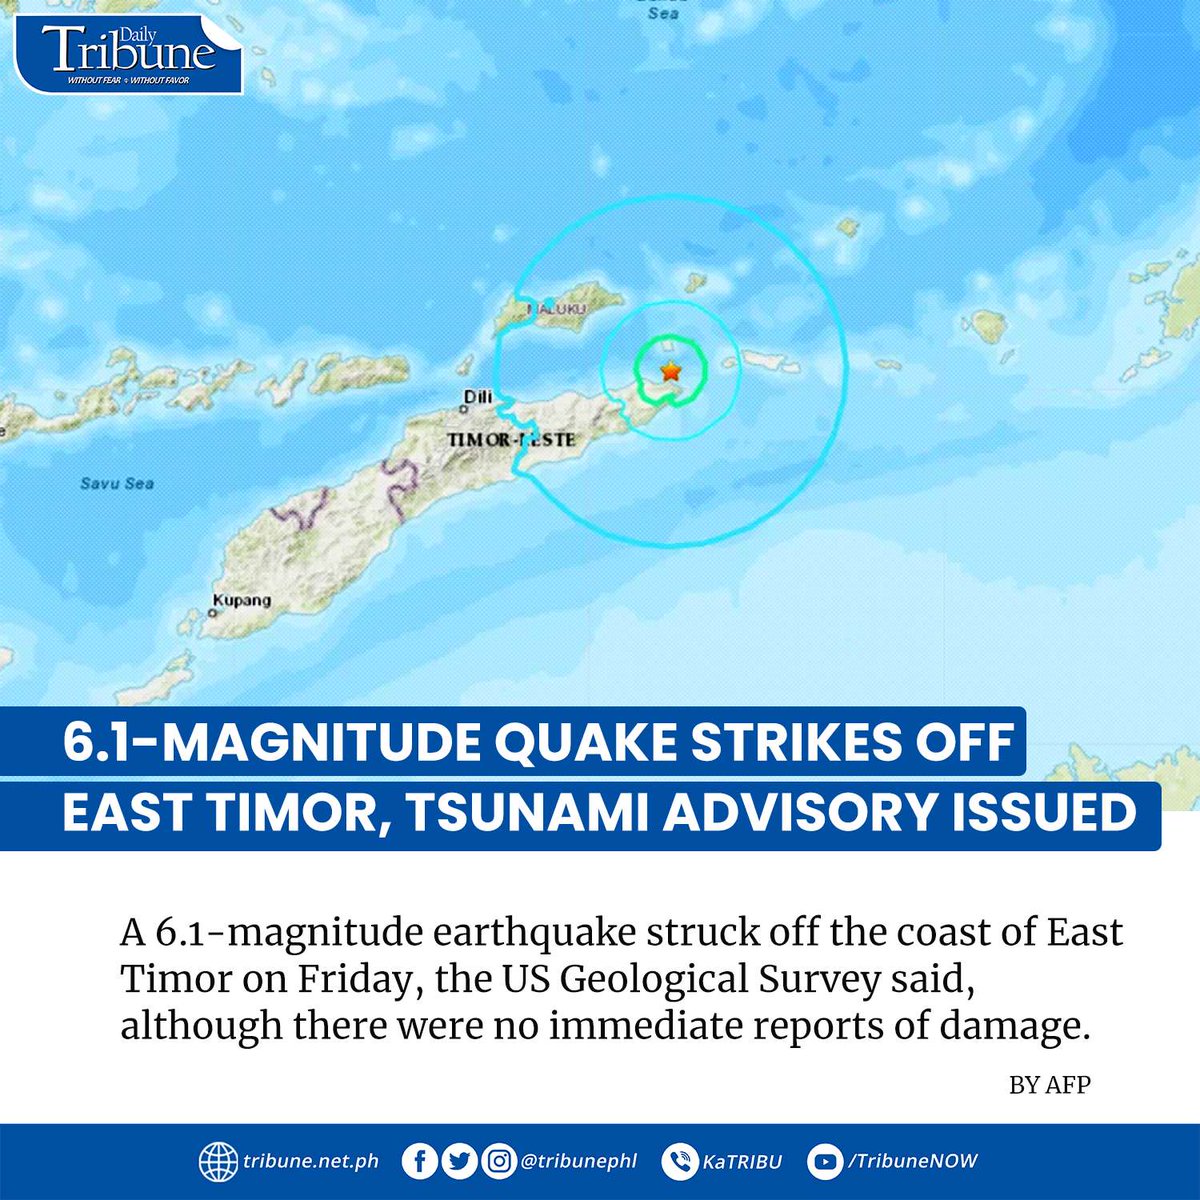 A tsunami advisory group said the quake “may be capable of generating a tsunami affecting the Indian Ocean region”.

Full Story: https://t.co/emfCultUAe

#earthquake
#Tsunami 
#DailyTribune https://t.co/EsJNCulzxO